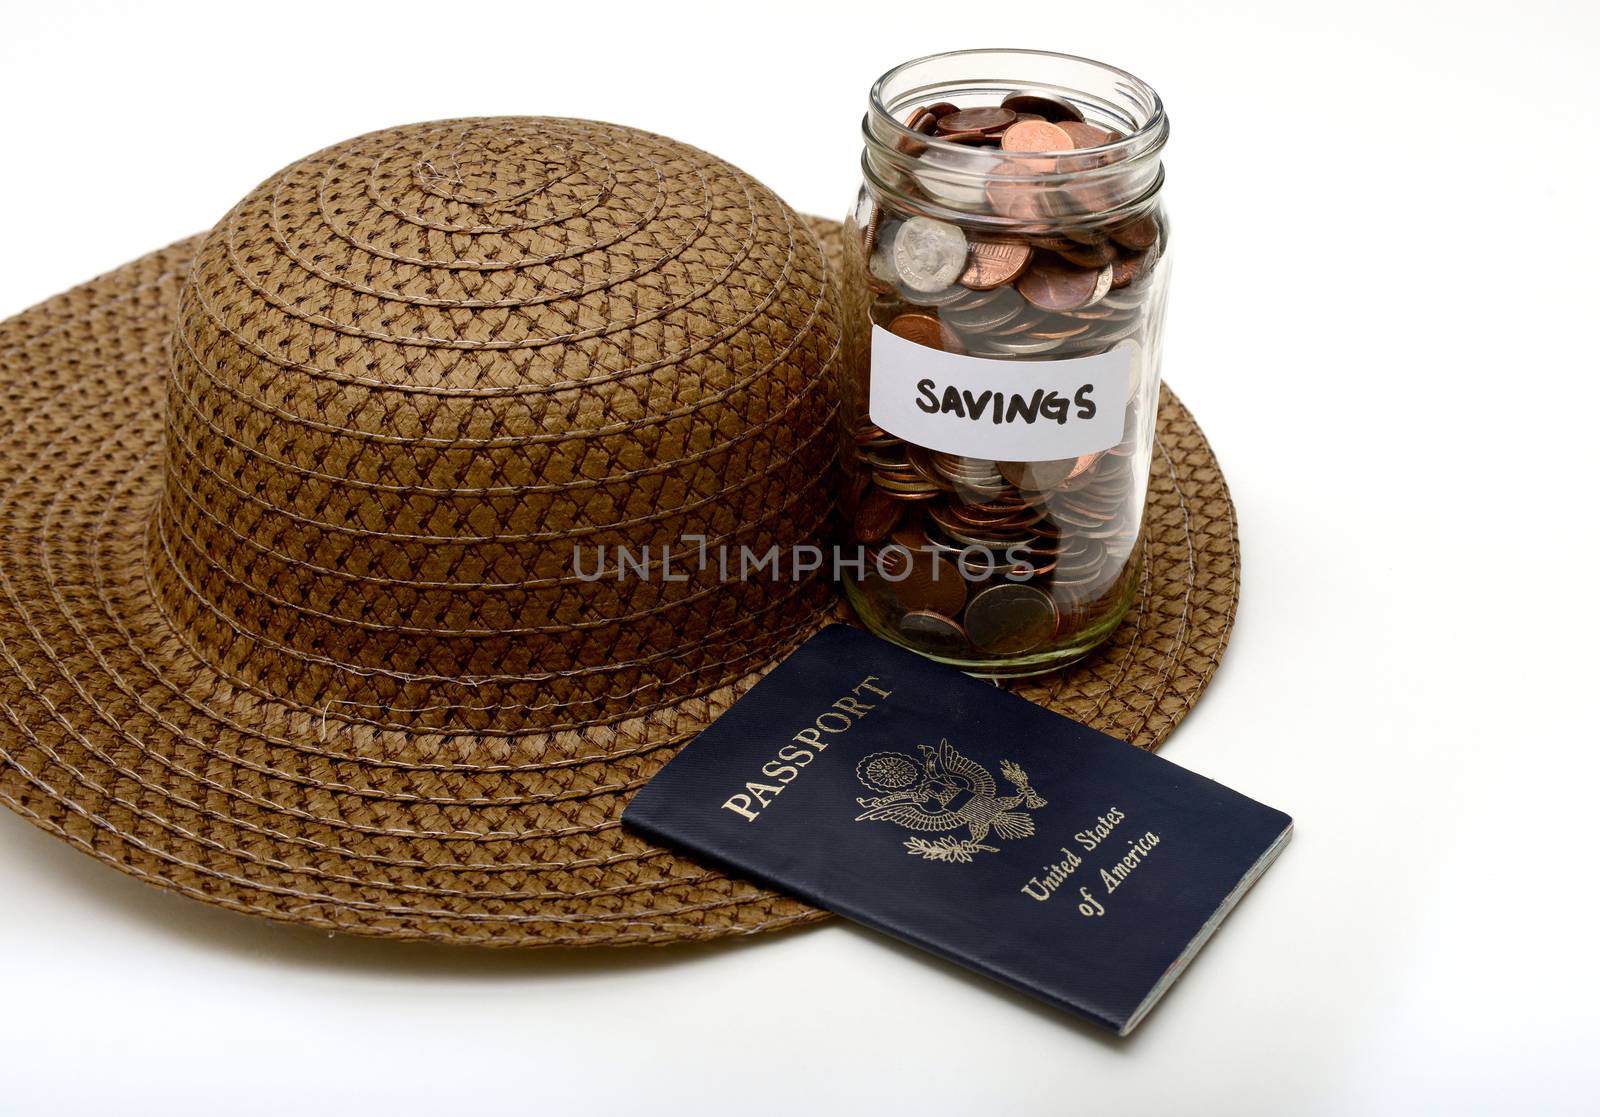 saving money for international traveling or vacation